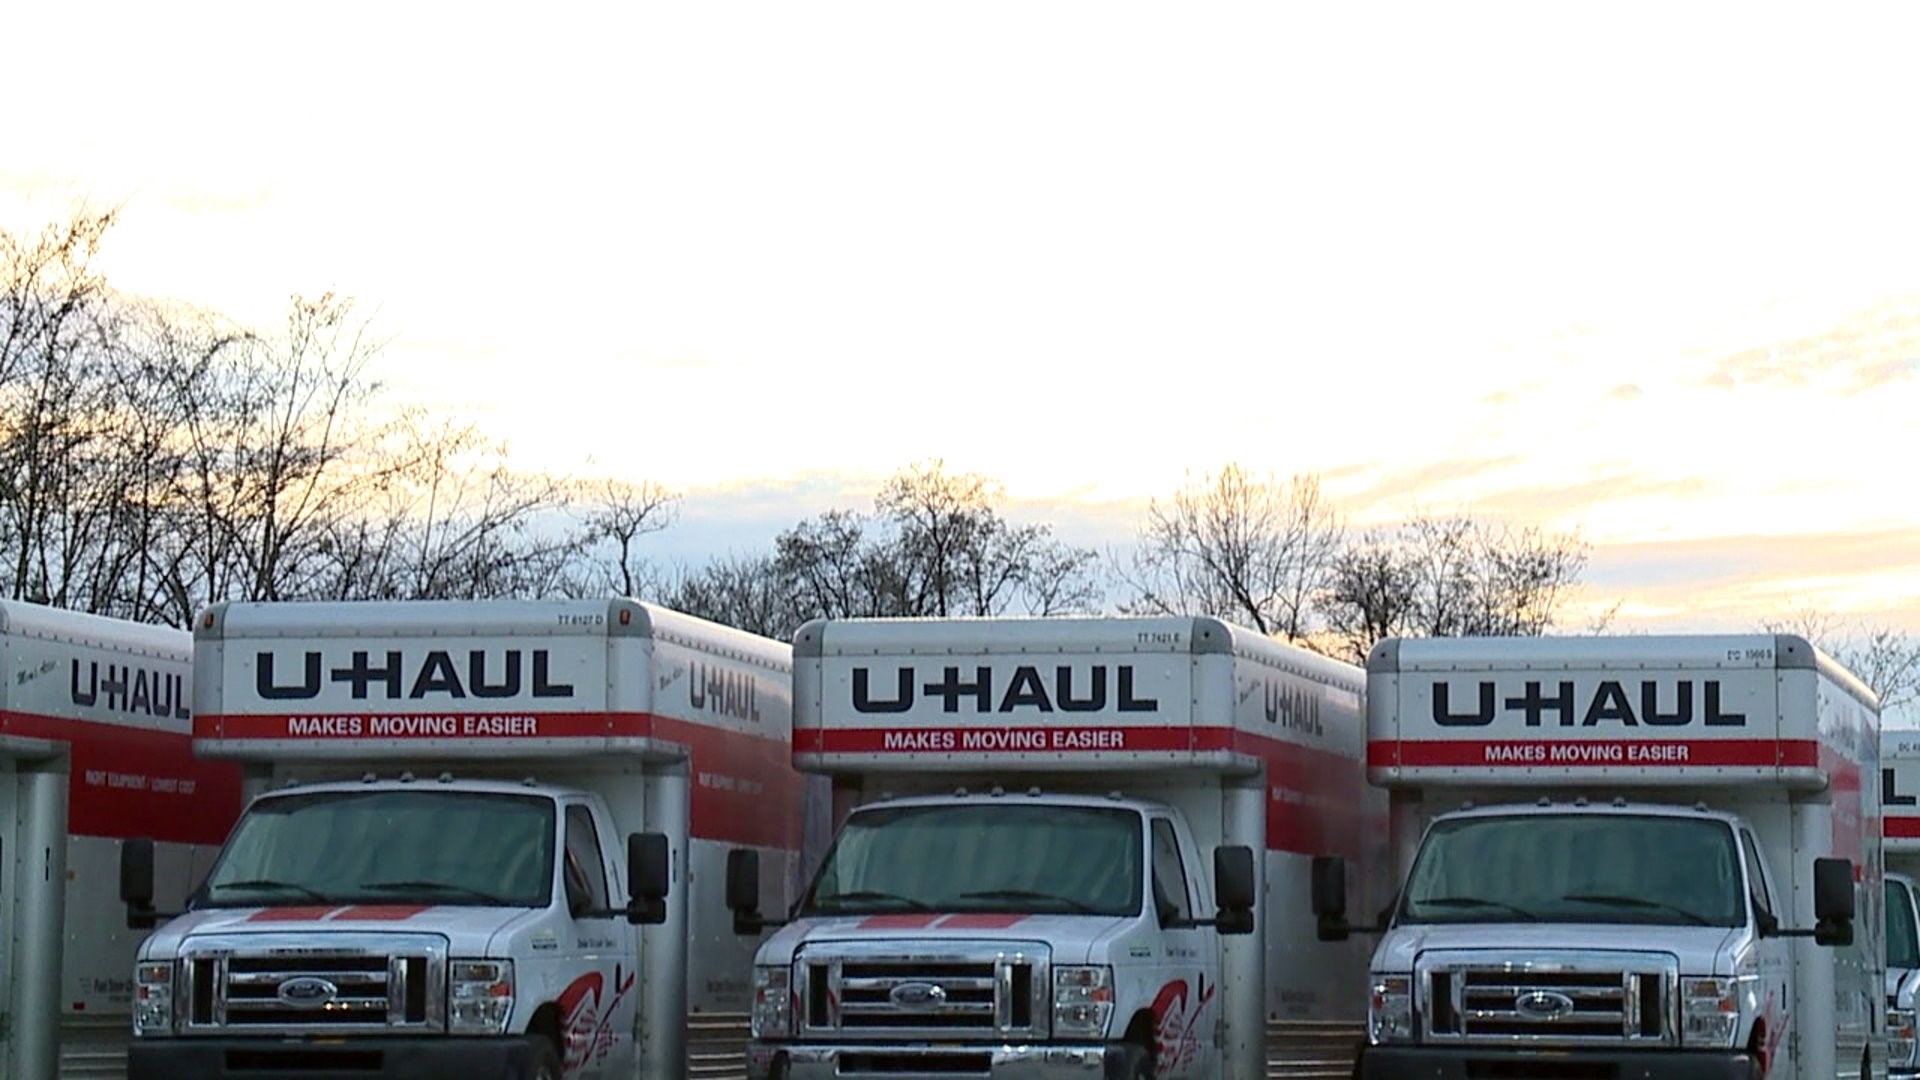 PA residents react to U-Haul`s decision to not hire those who use nicotine